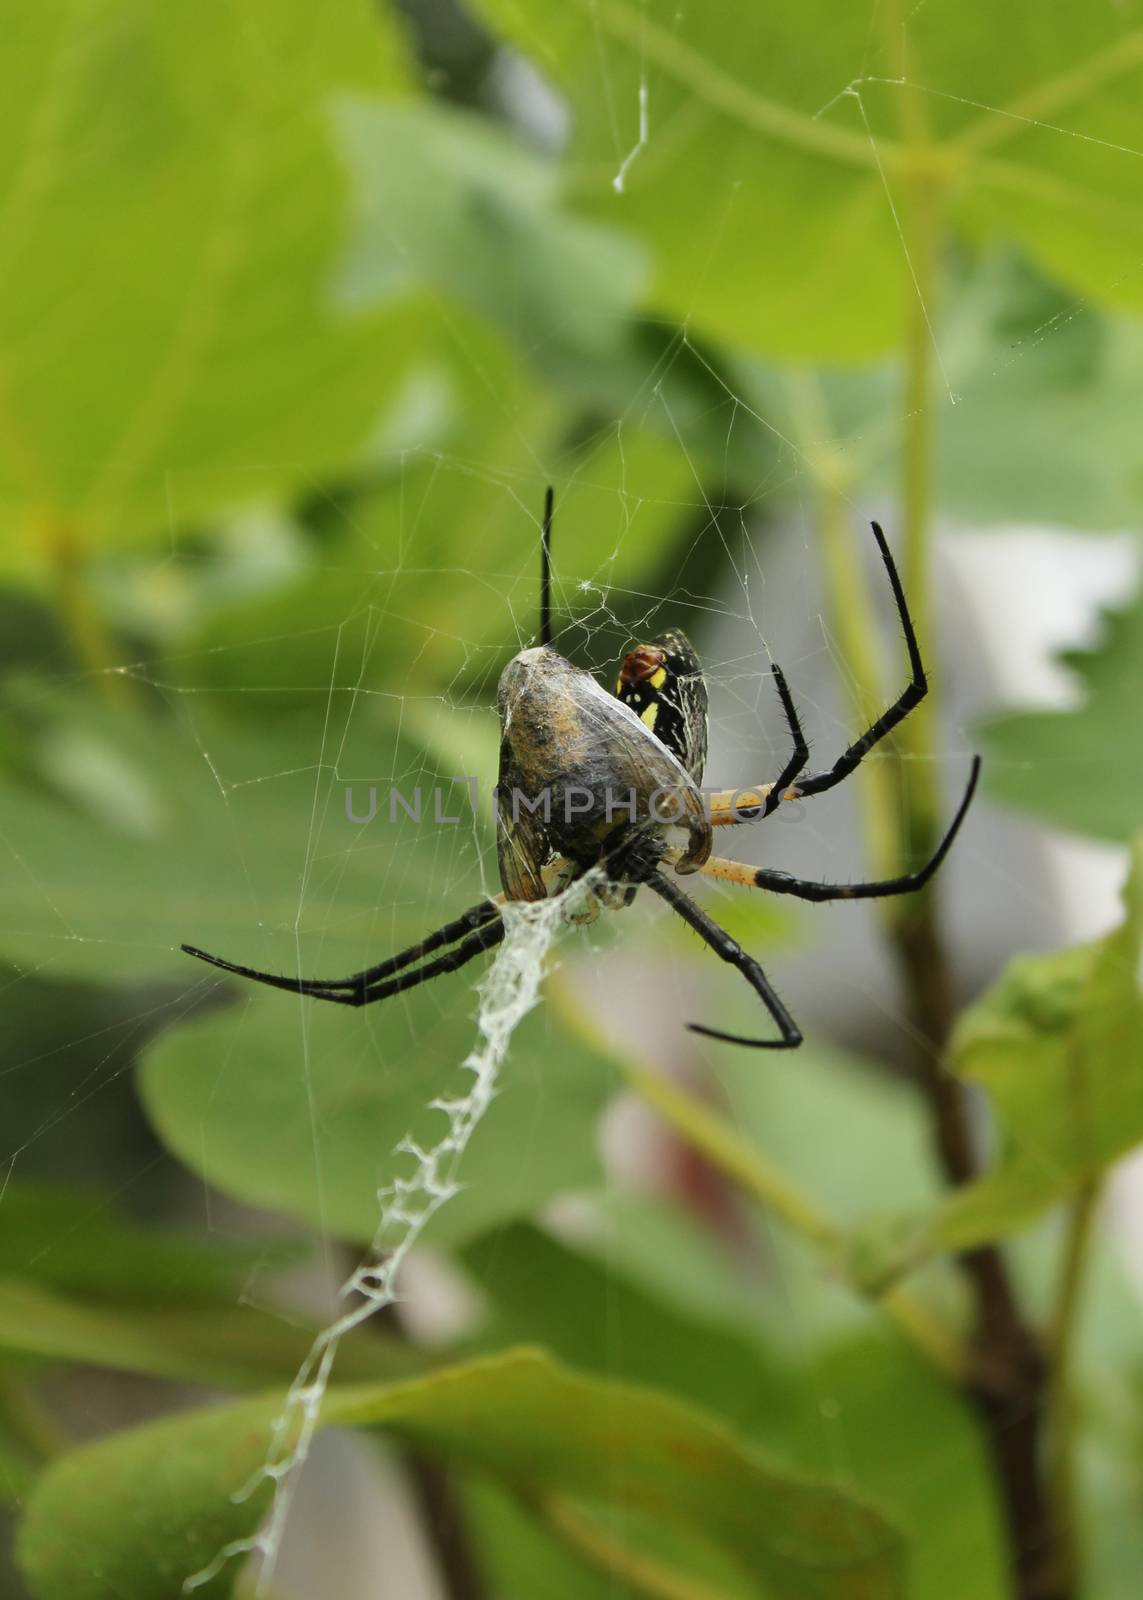 Black and Yellow Garden Spider Argiope aurantia,  Eating Prey in Fig Tree